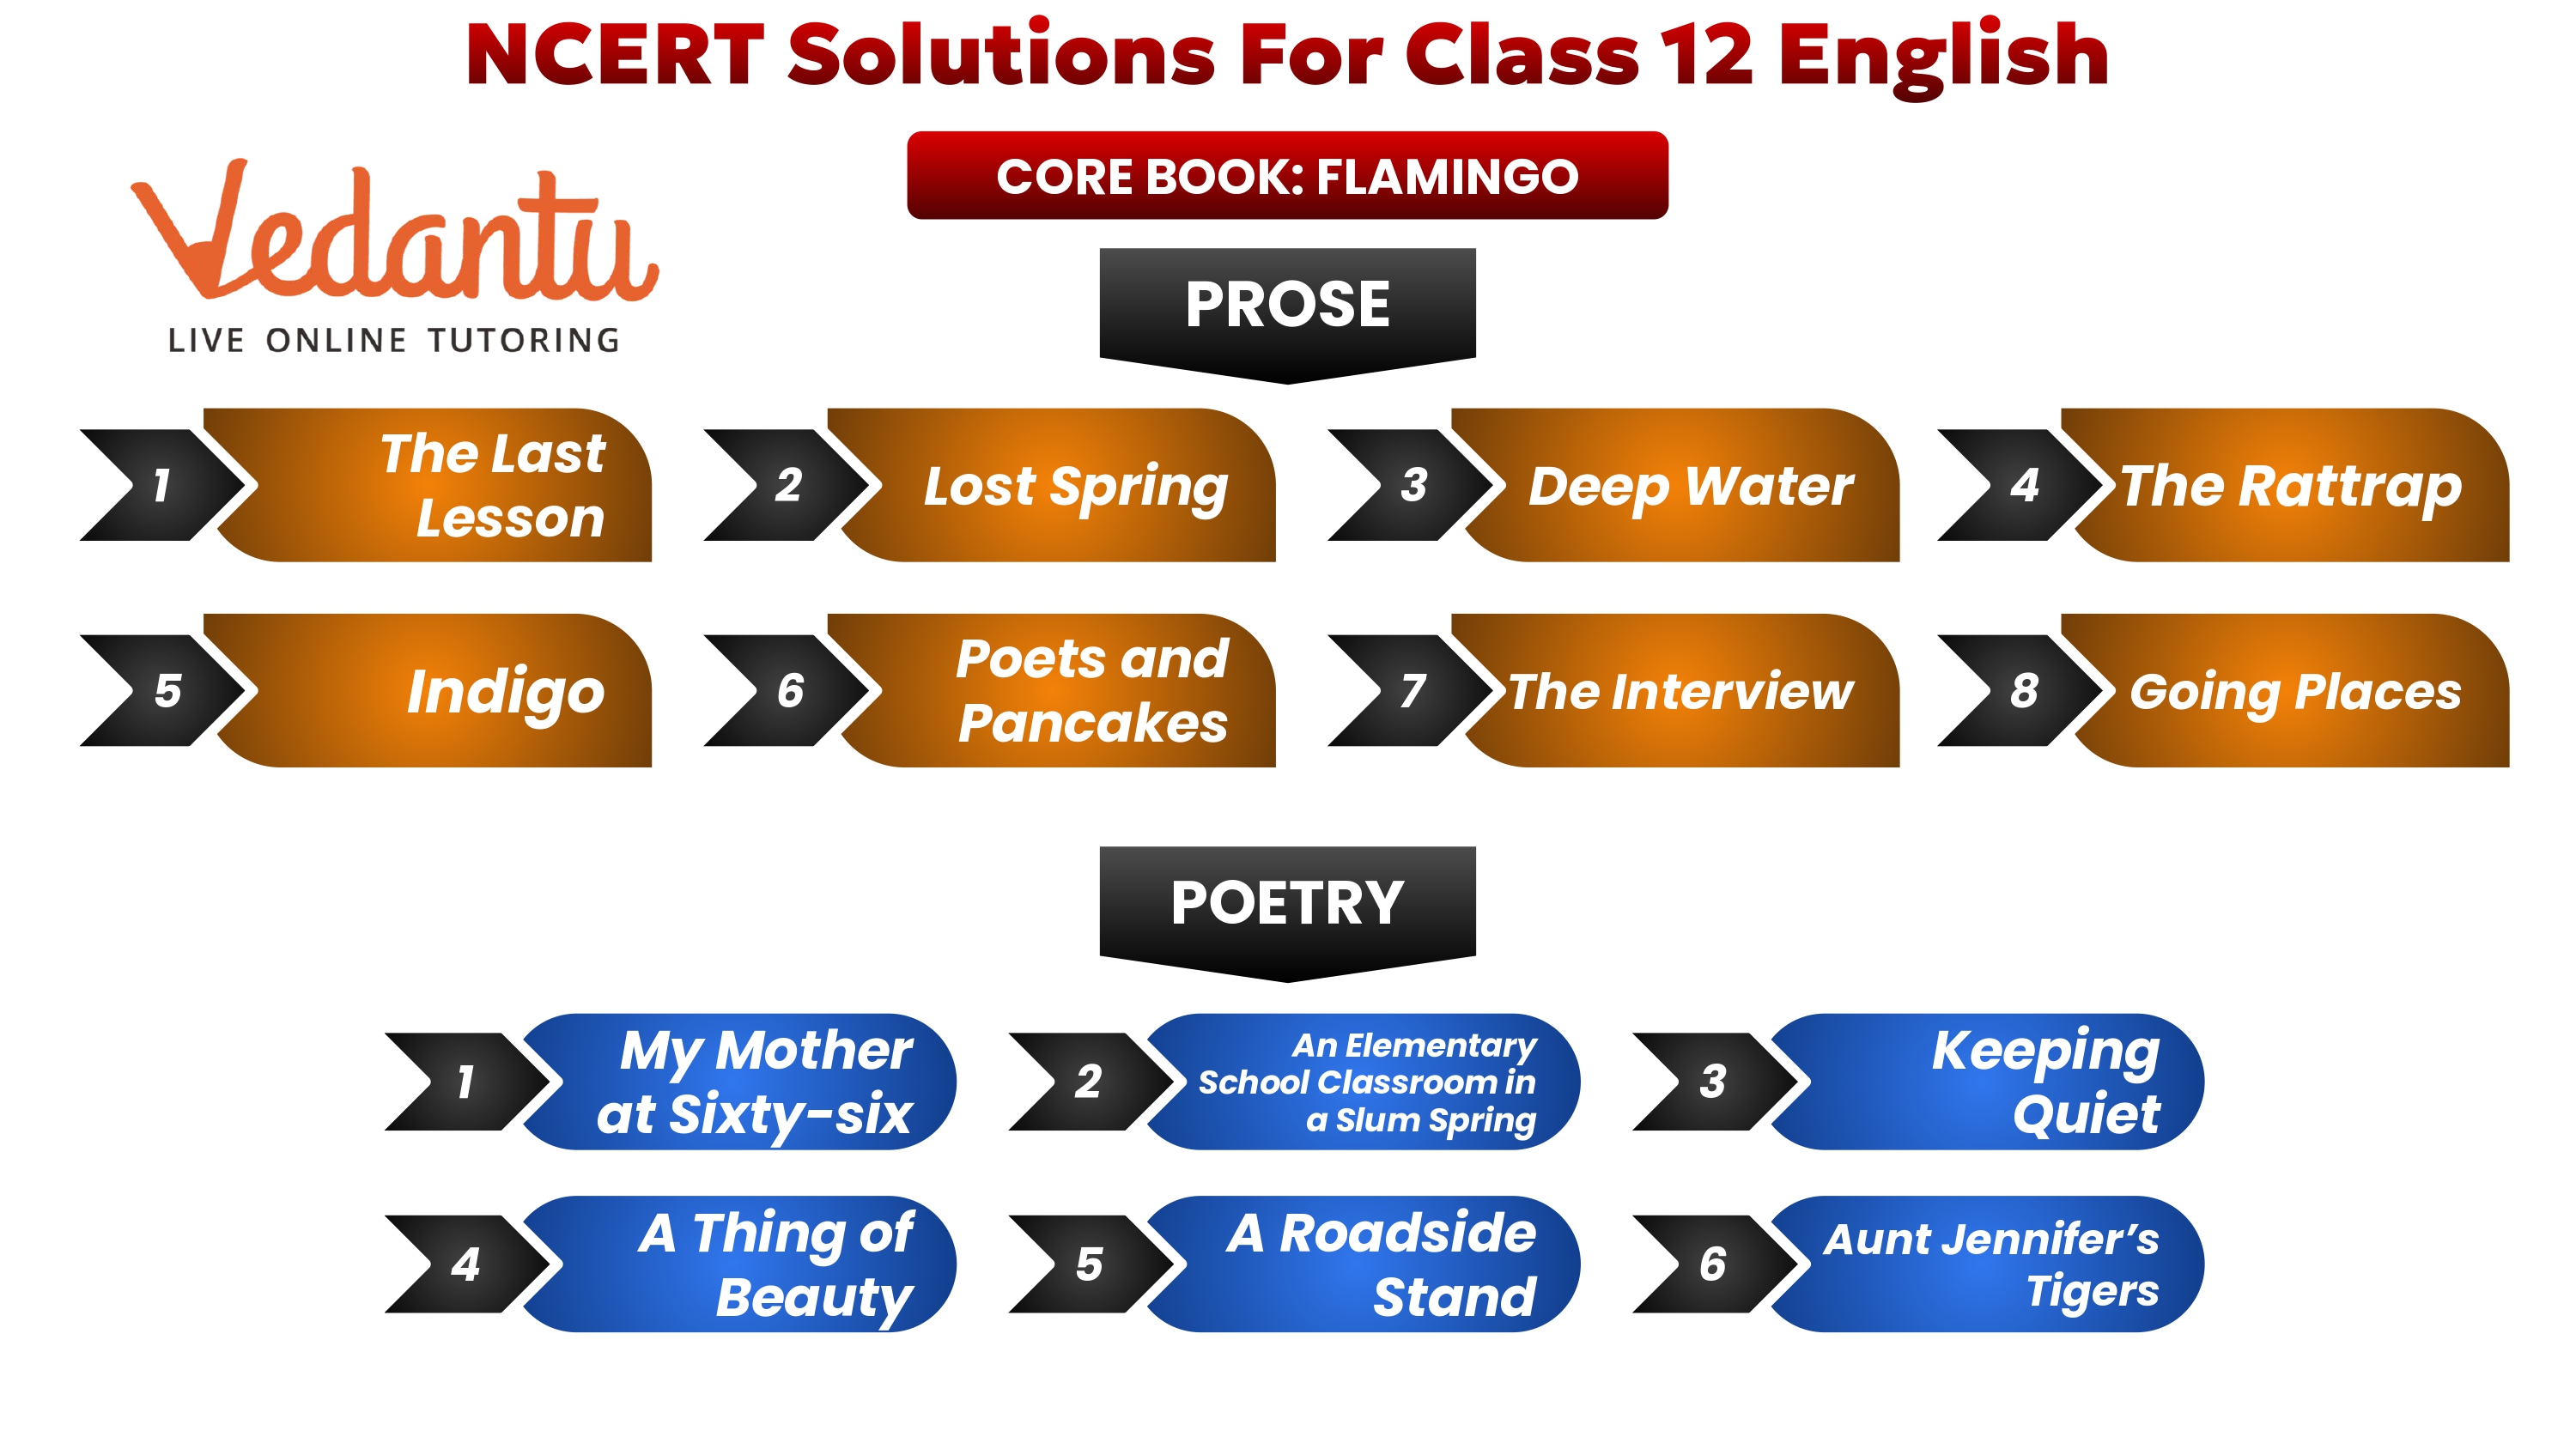 NCERT Solutions for Class 12 English Flamingo Chapter-wise Overview